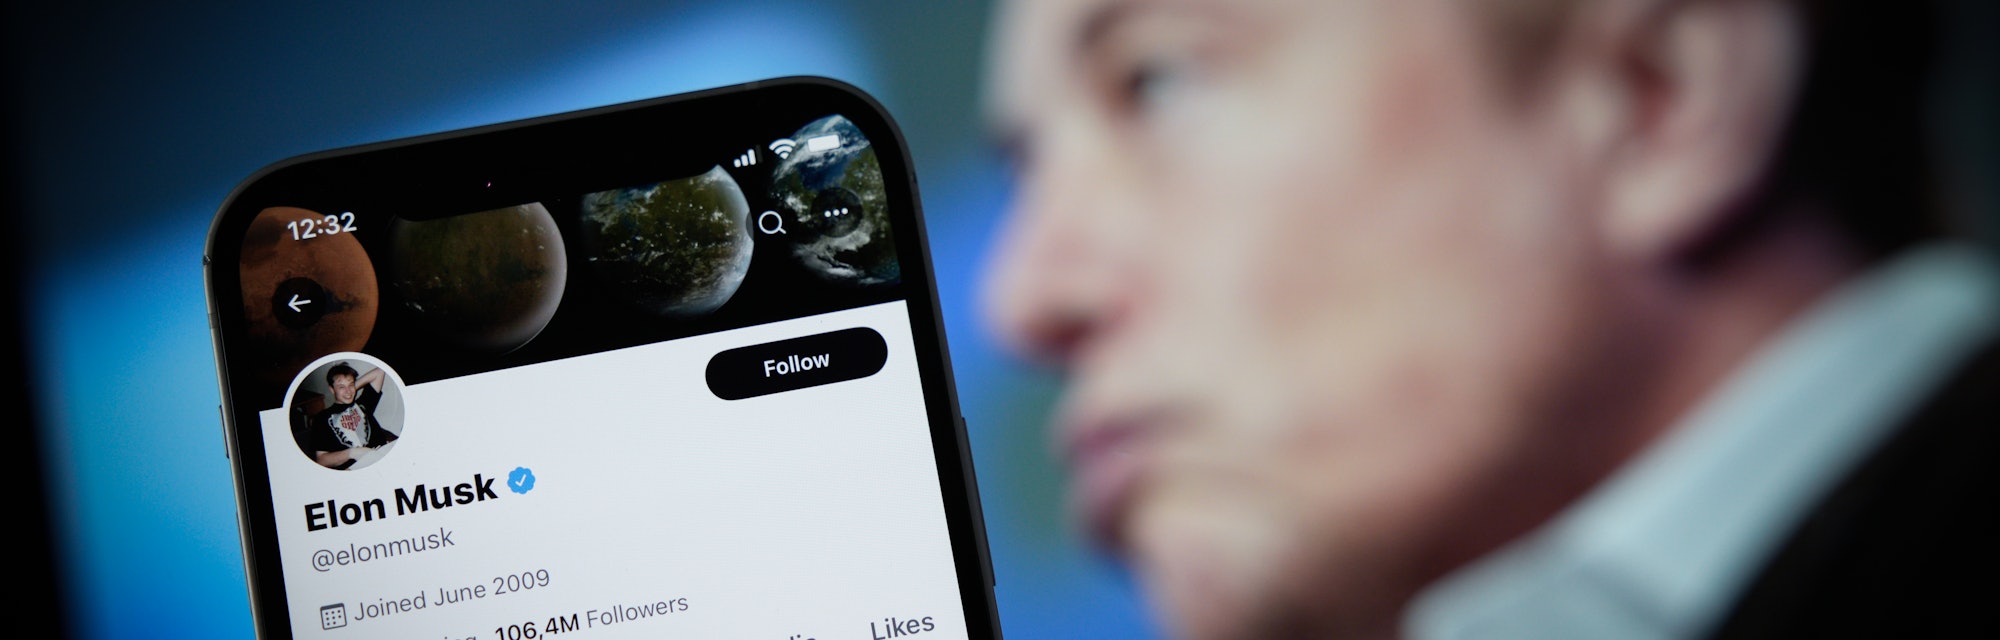 The Twitter profile page belonging to Elon Musk is seen on an Apple iPhone mobile phone in this phot...